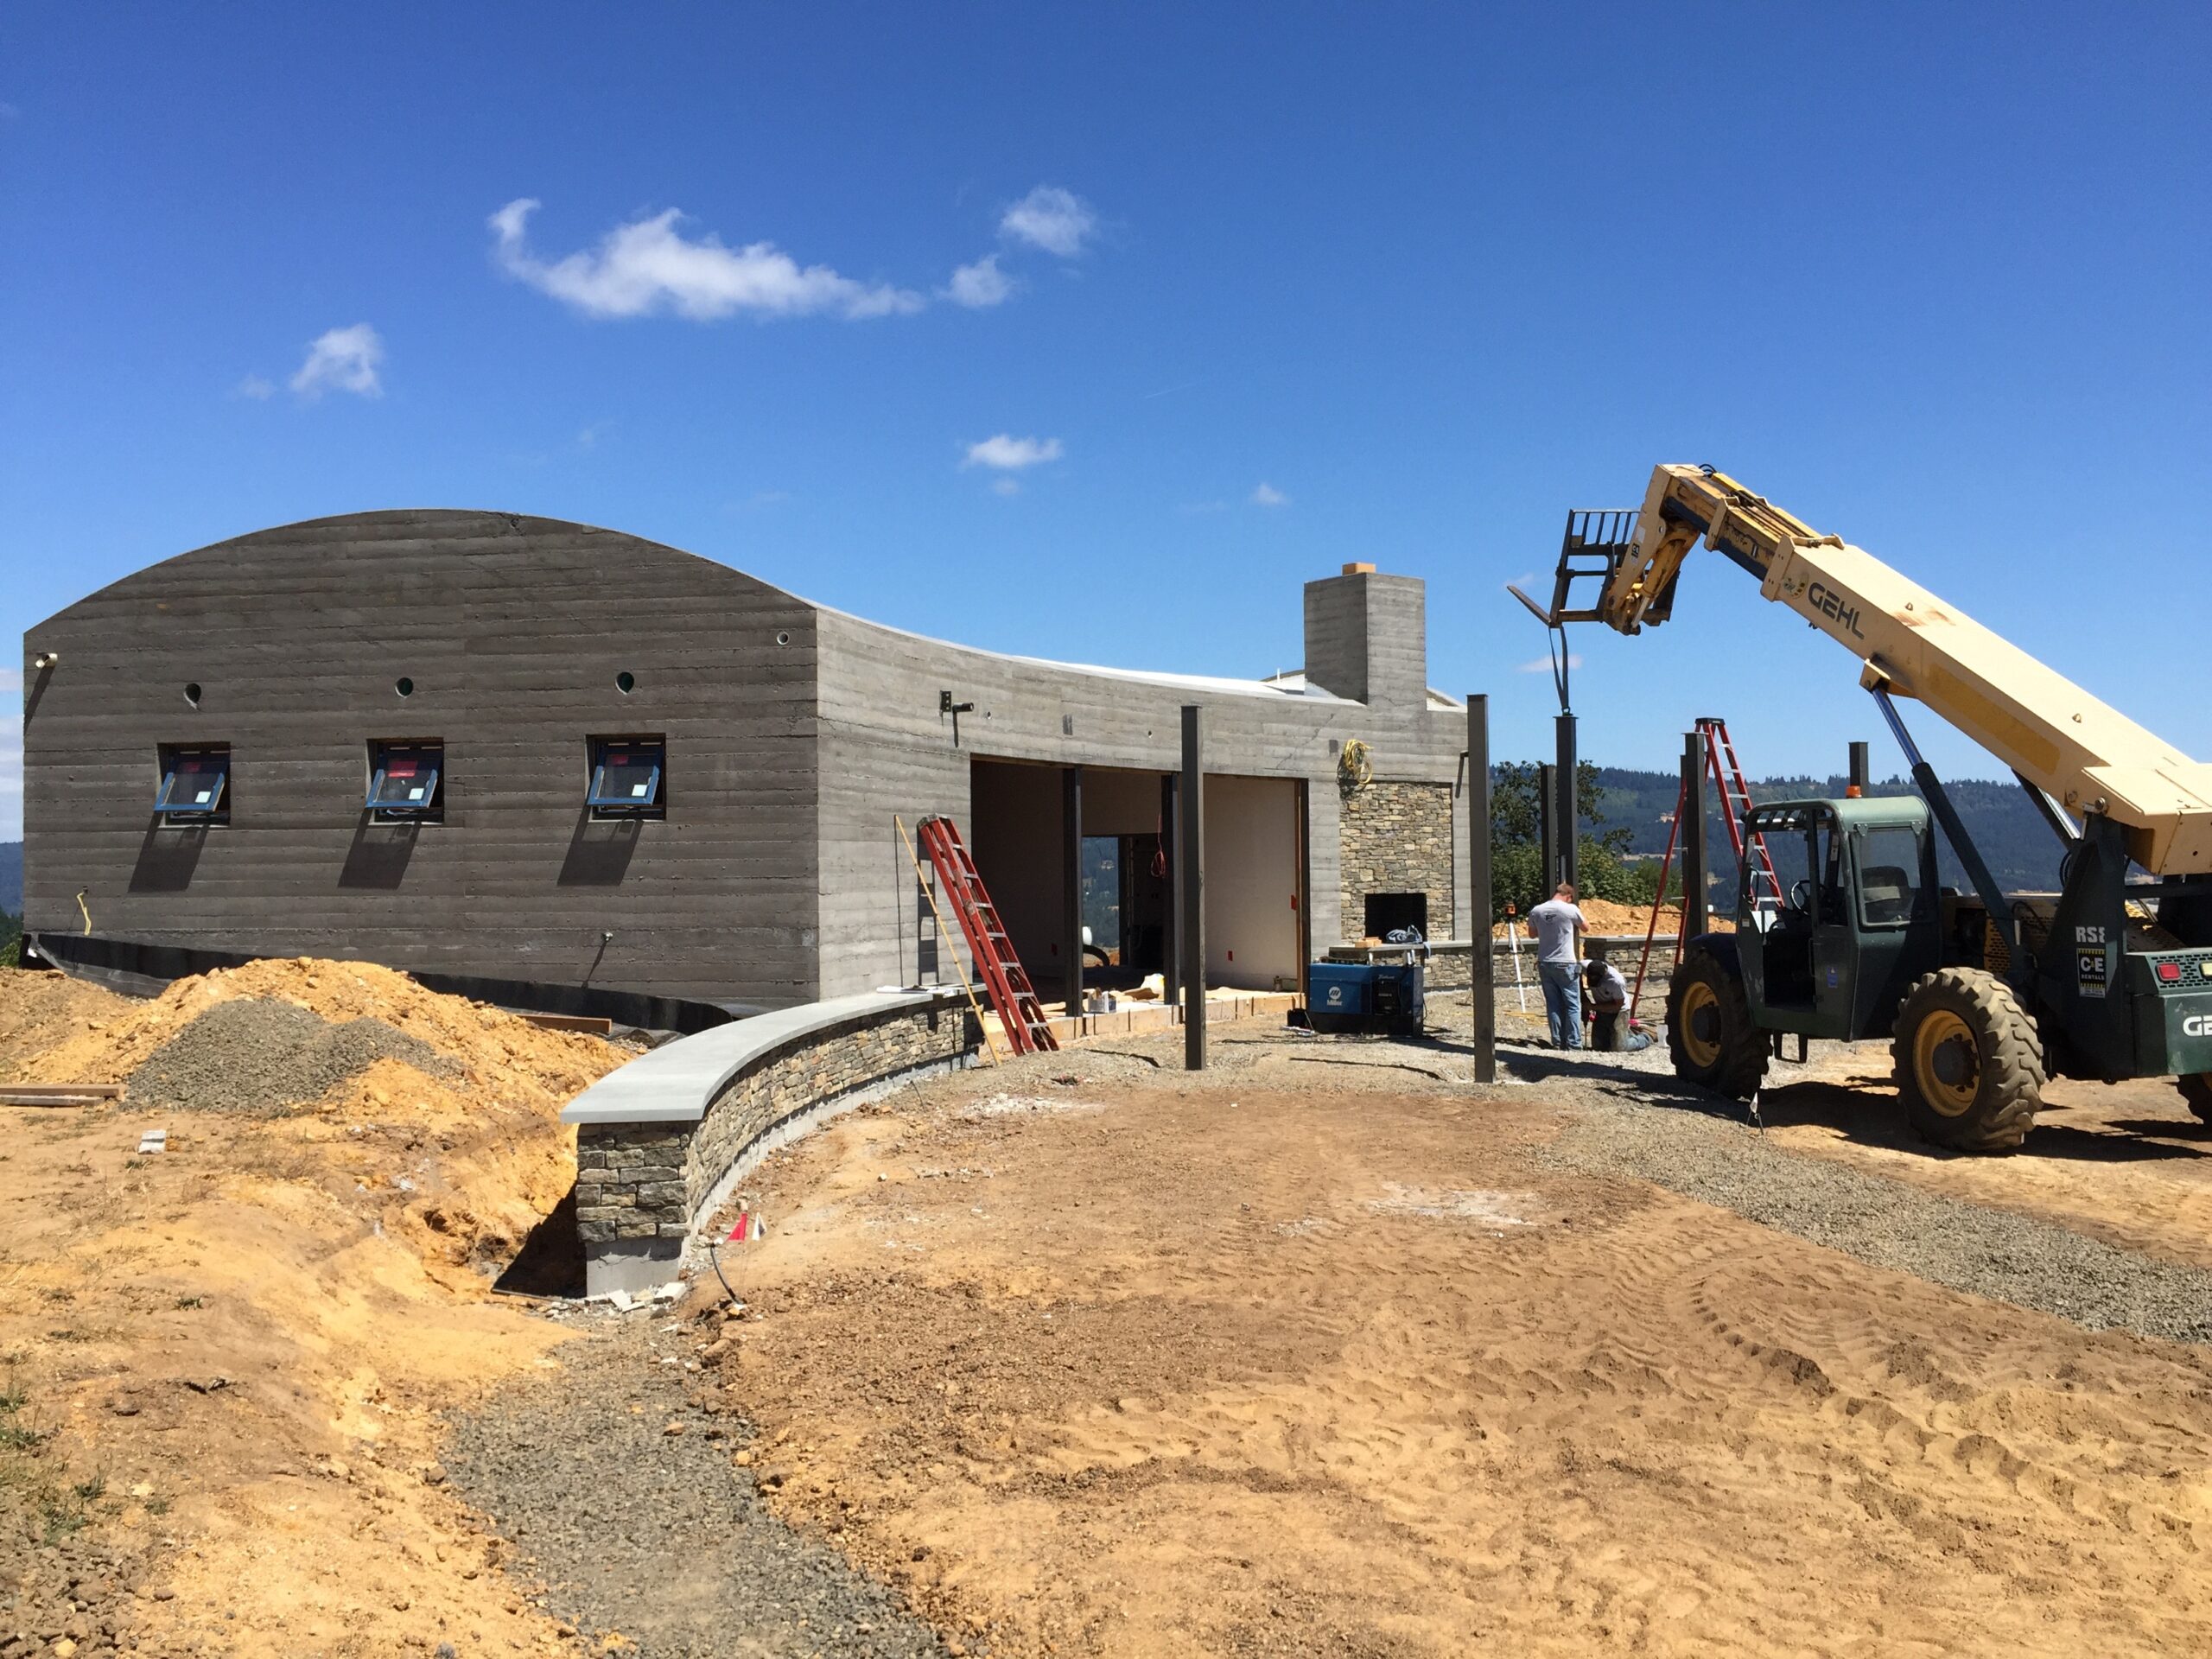 Installing support columns for the patio overhang outside the tasting room at Fairsing Vineyard